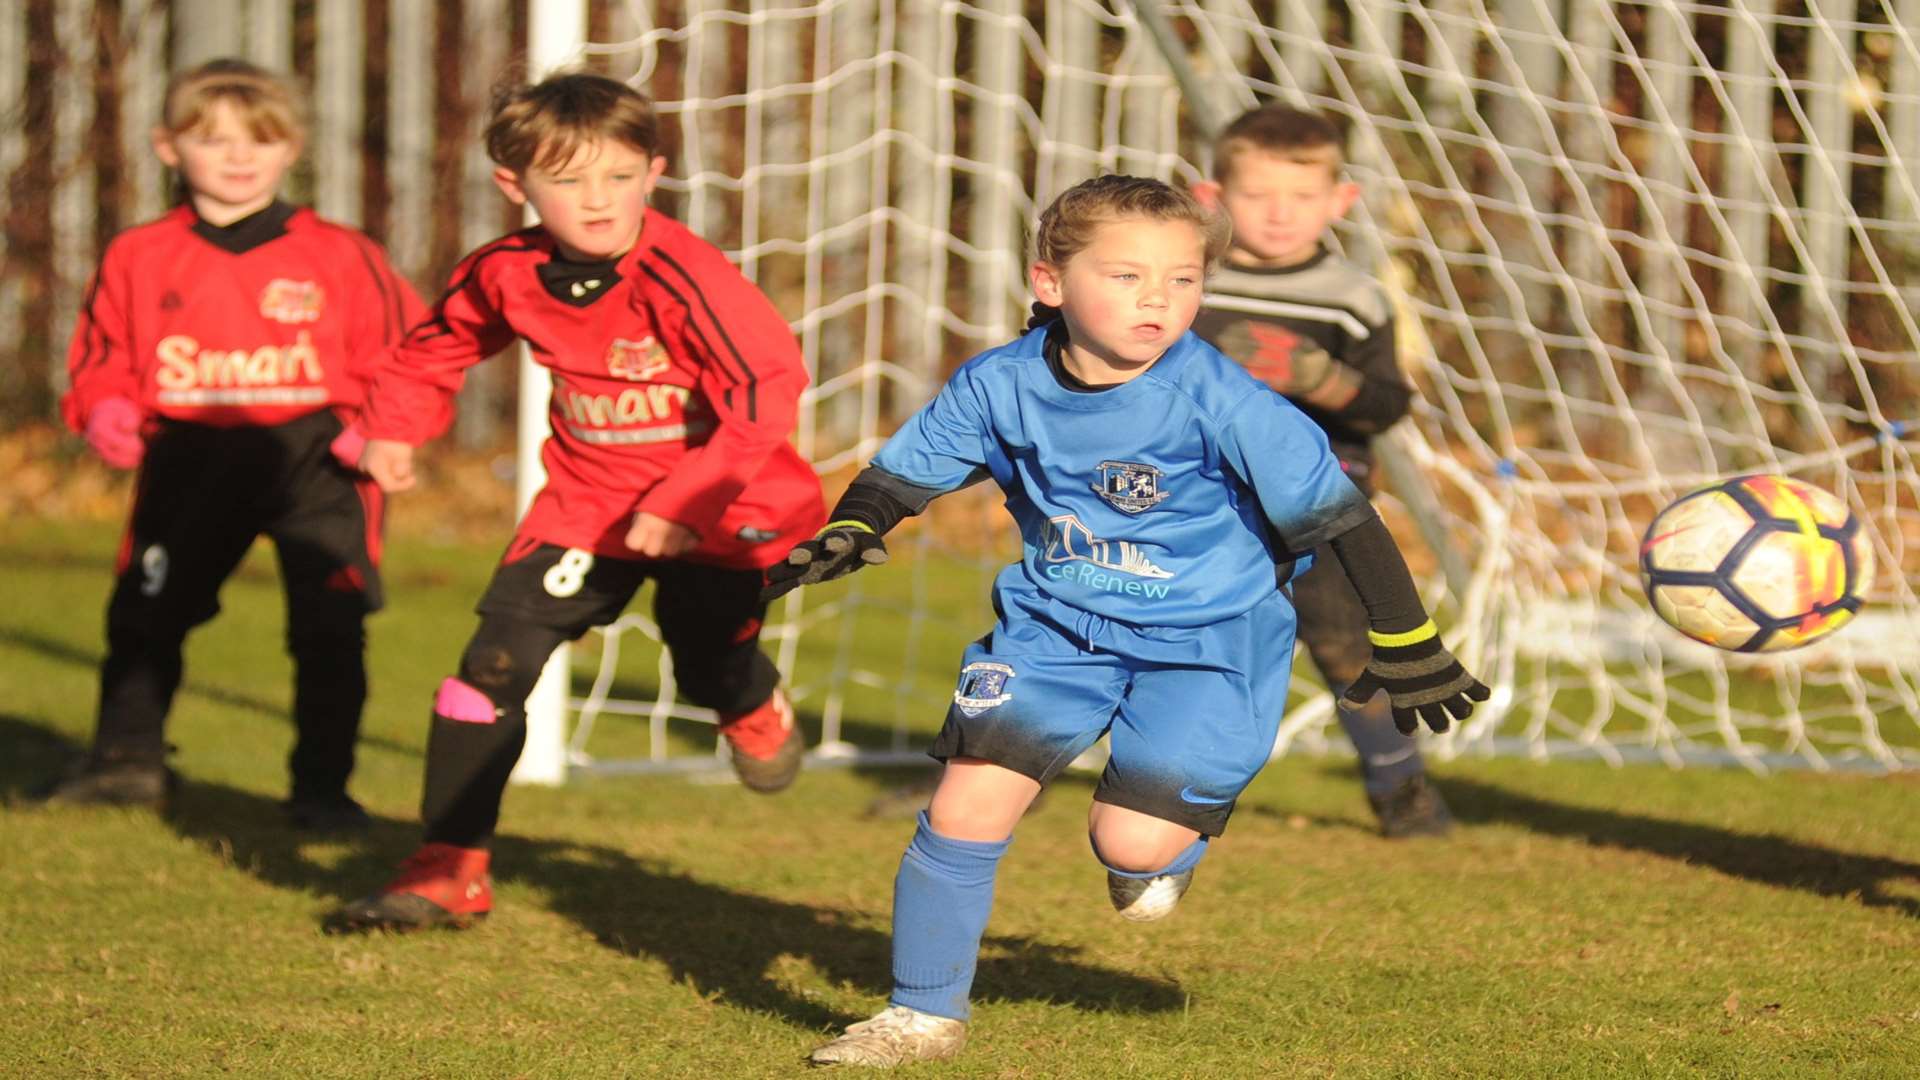 Woodcoombe Youth under-7s on the charge against Medway United East under-7s Picture: Steve Crispe